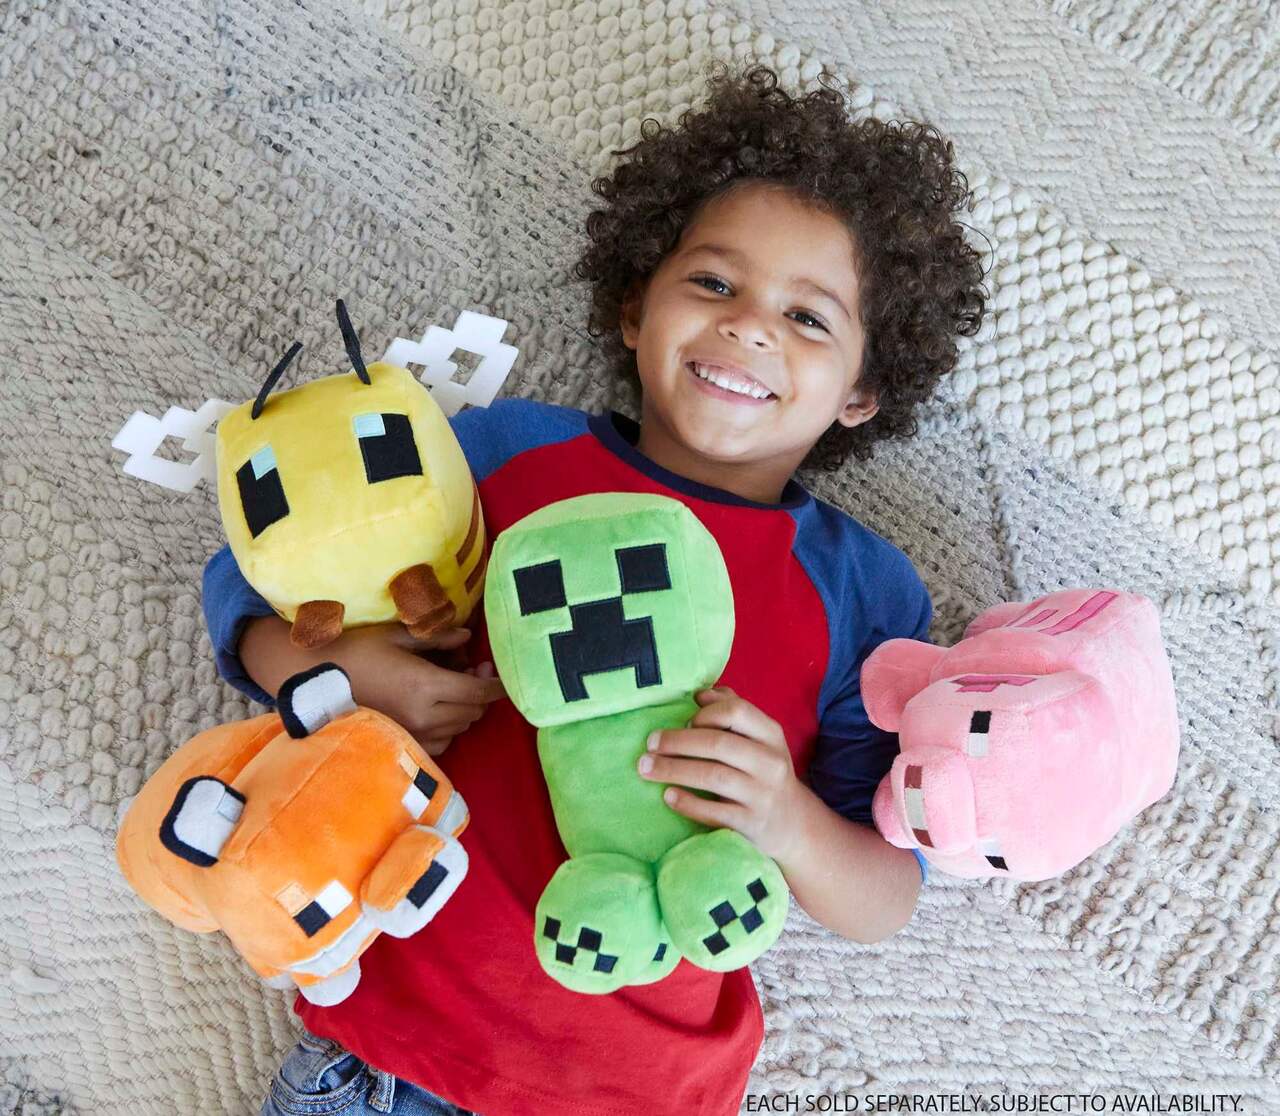 Fisher-Price Minecraft Basic Plush, Assorted, 8-in, Ages 3+